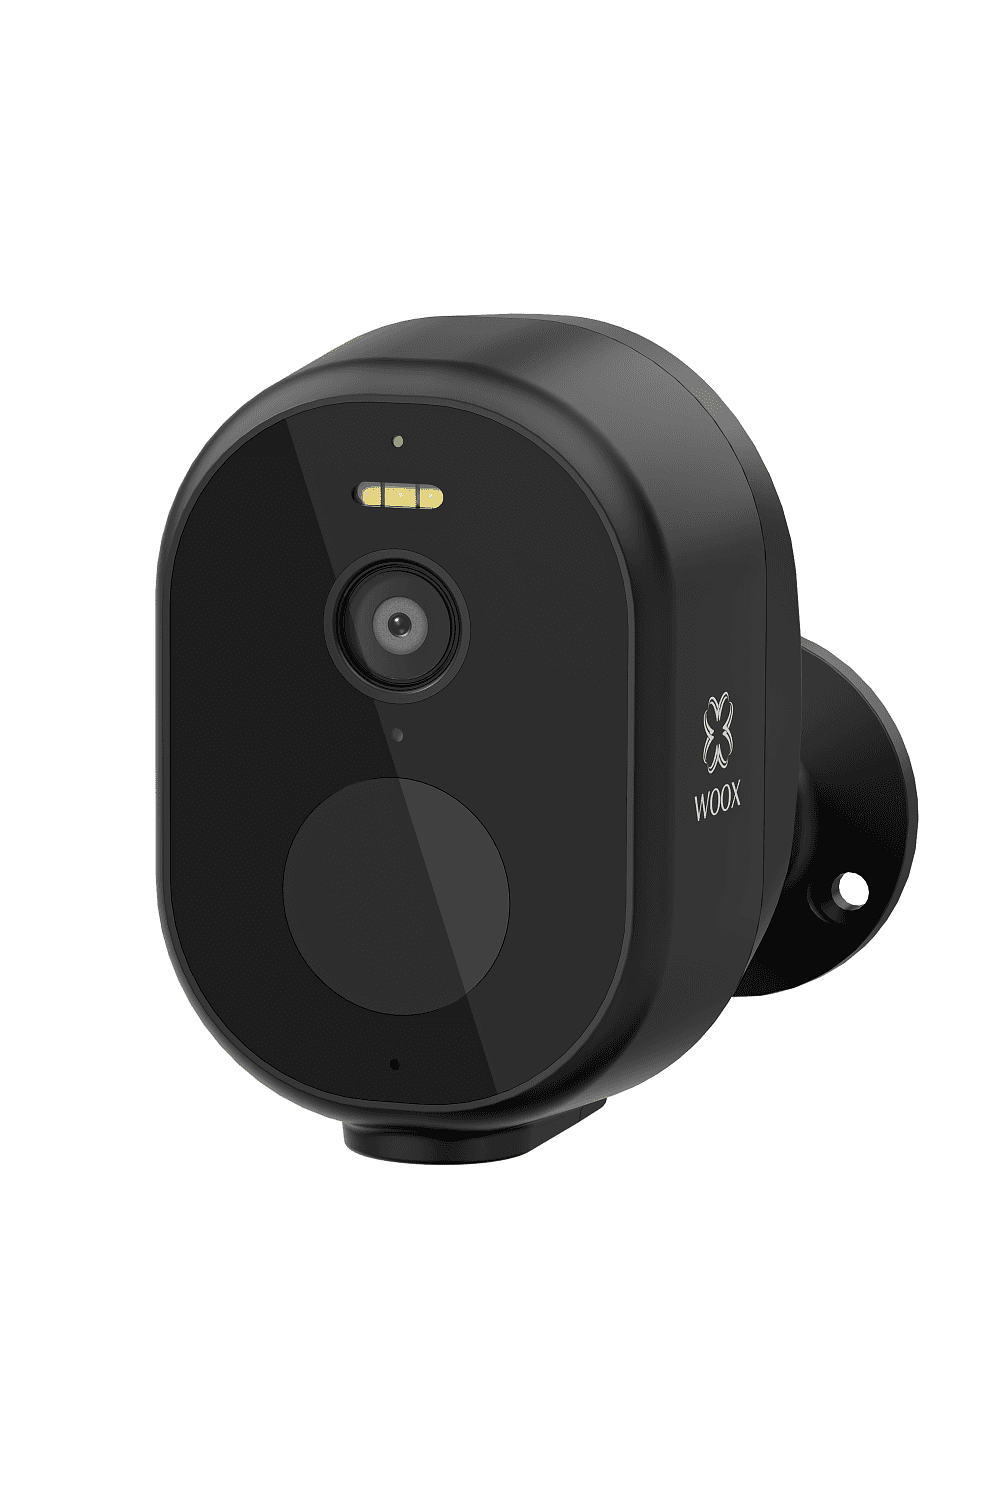 WOOX outdoor wireless security camera | R4252